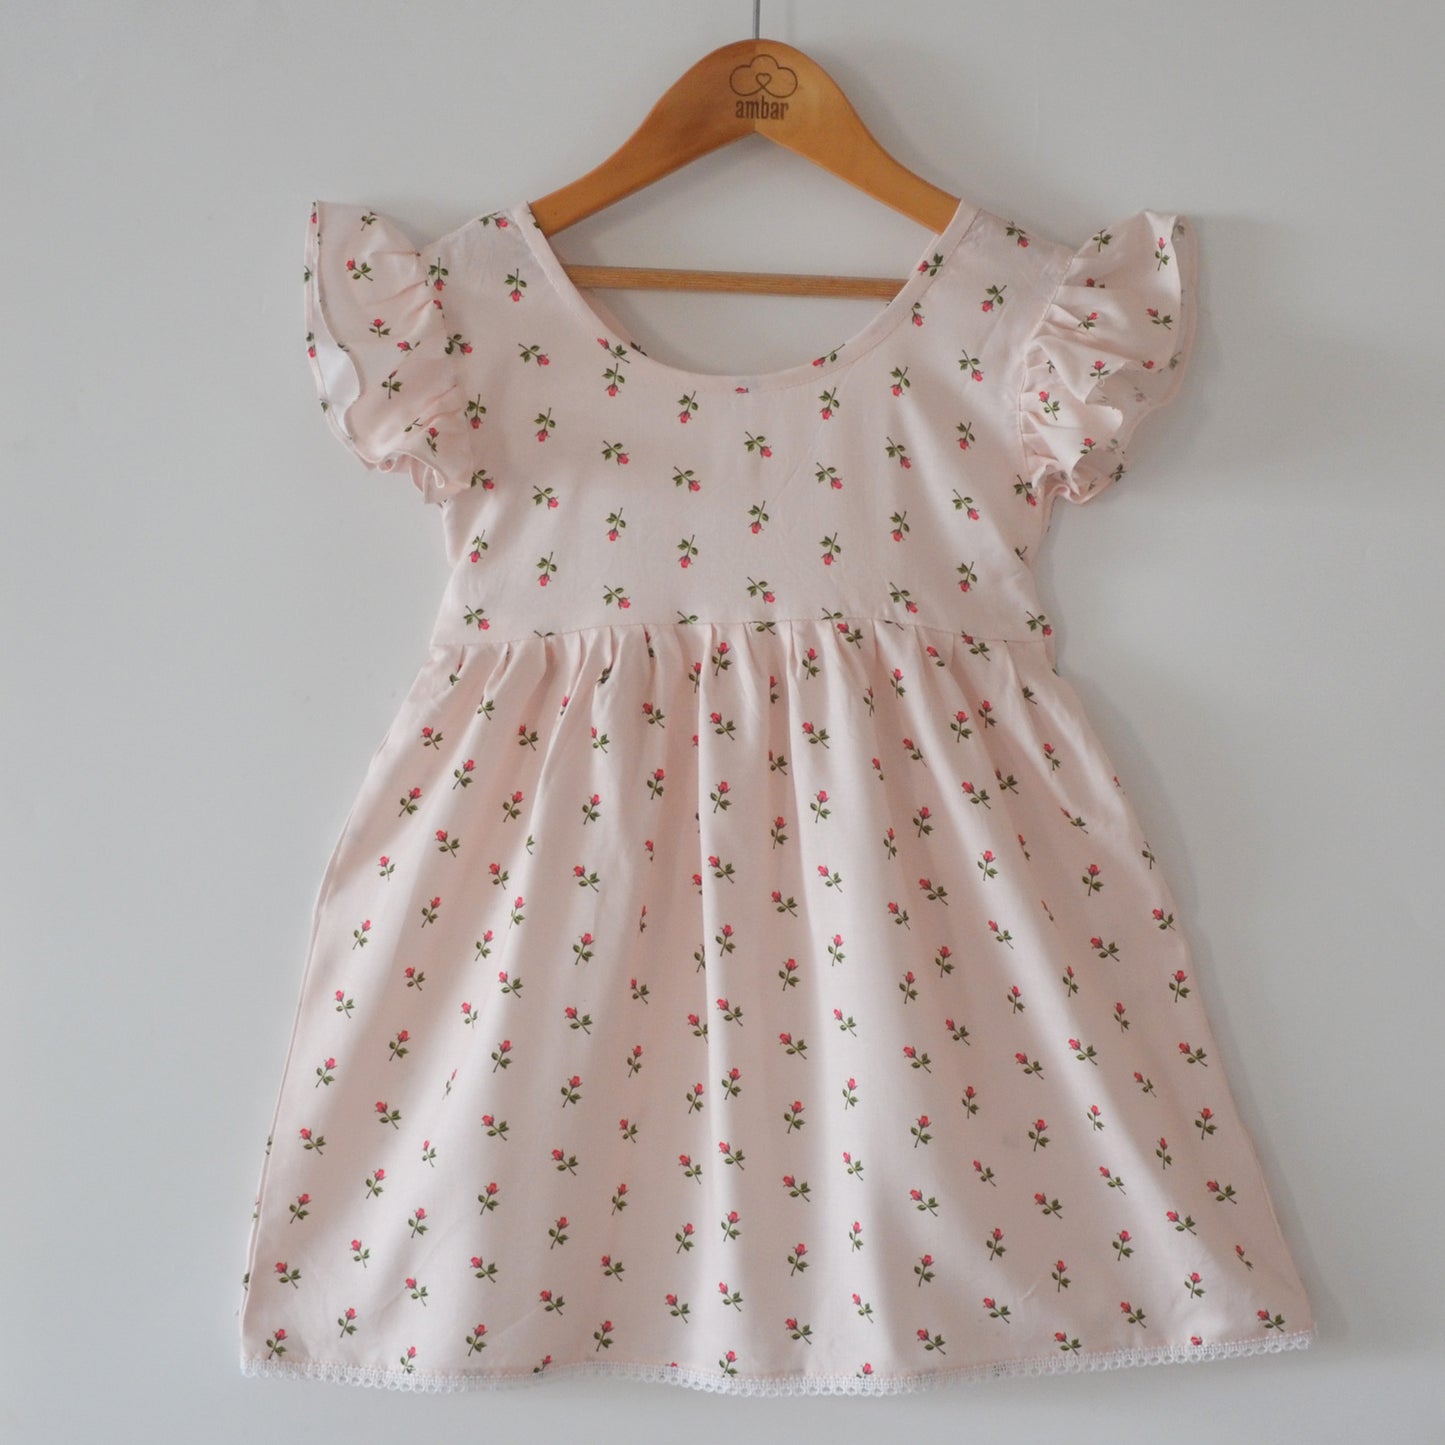 Eloise dress in rose print with hem lace  - Peach